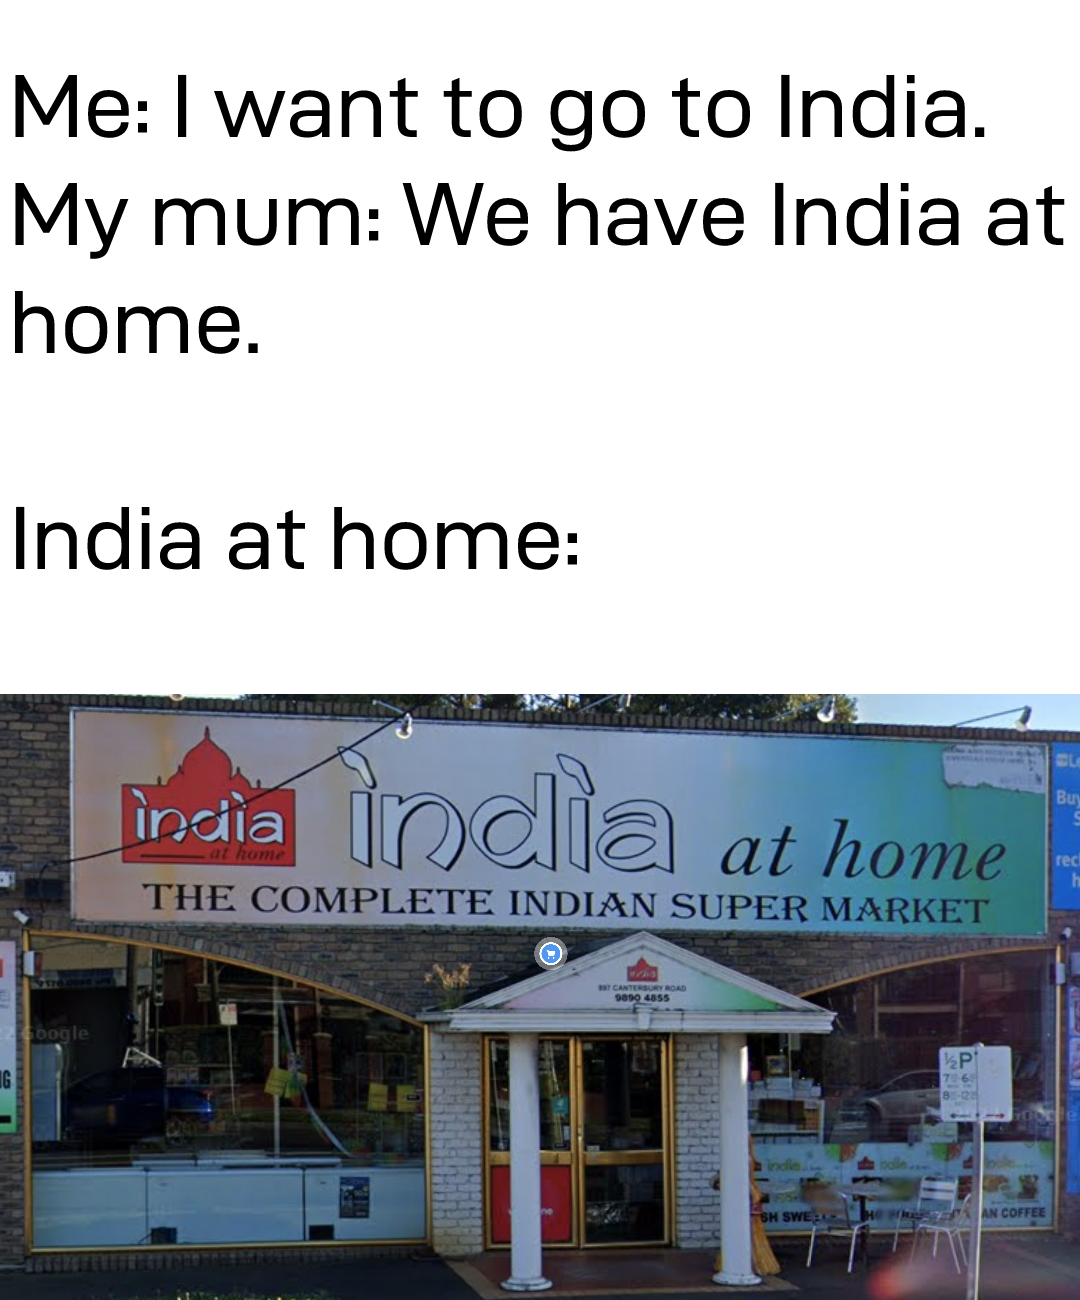 Always wanted to go to India